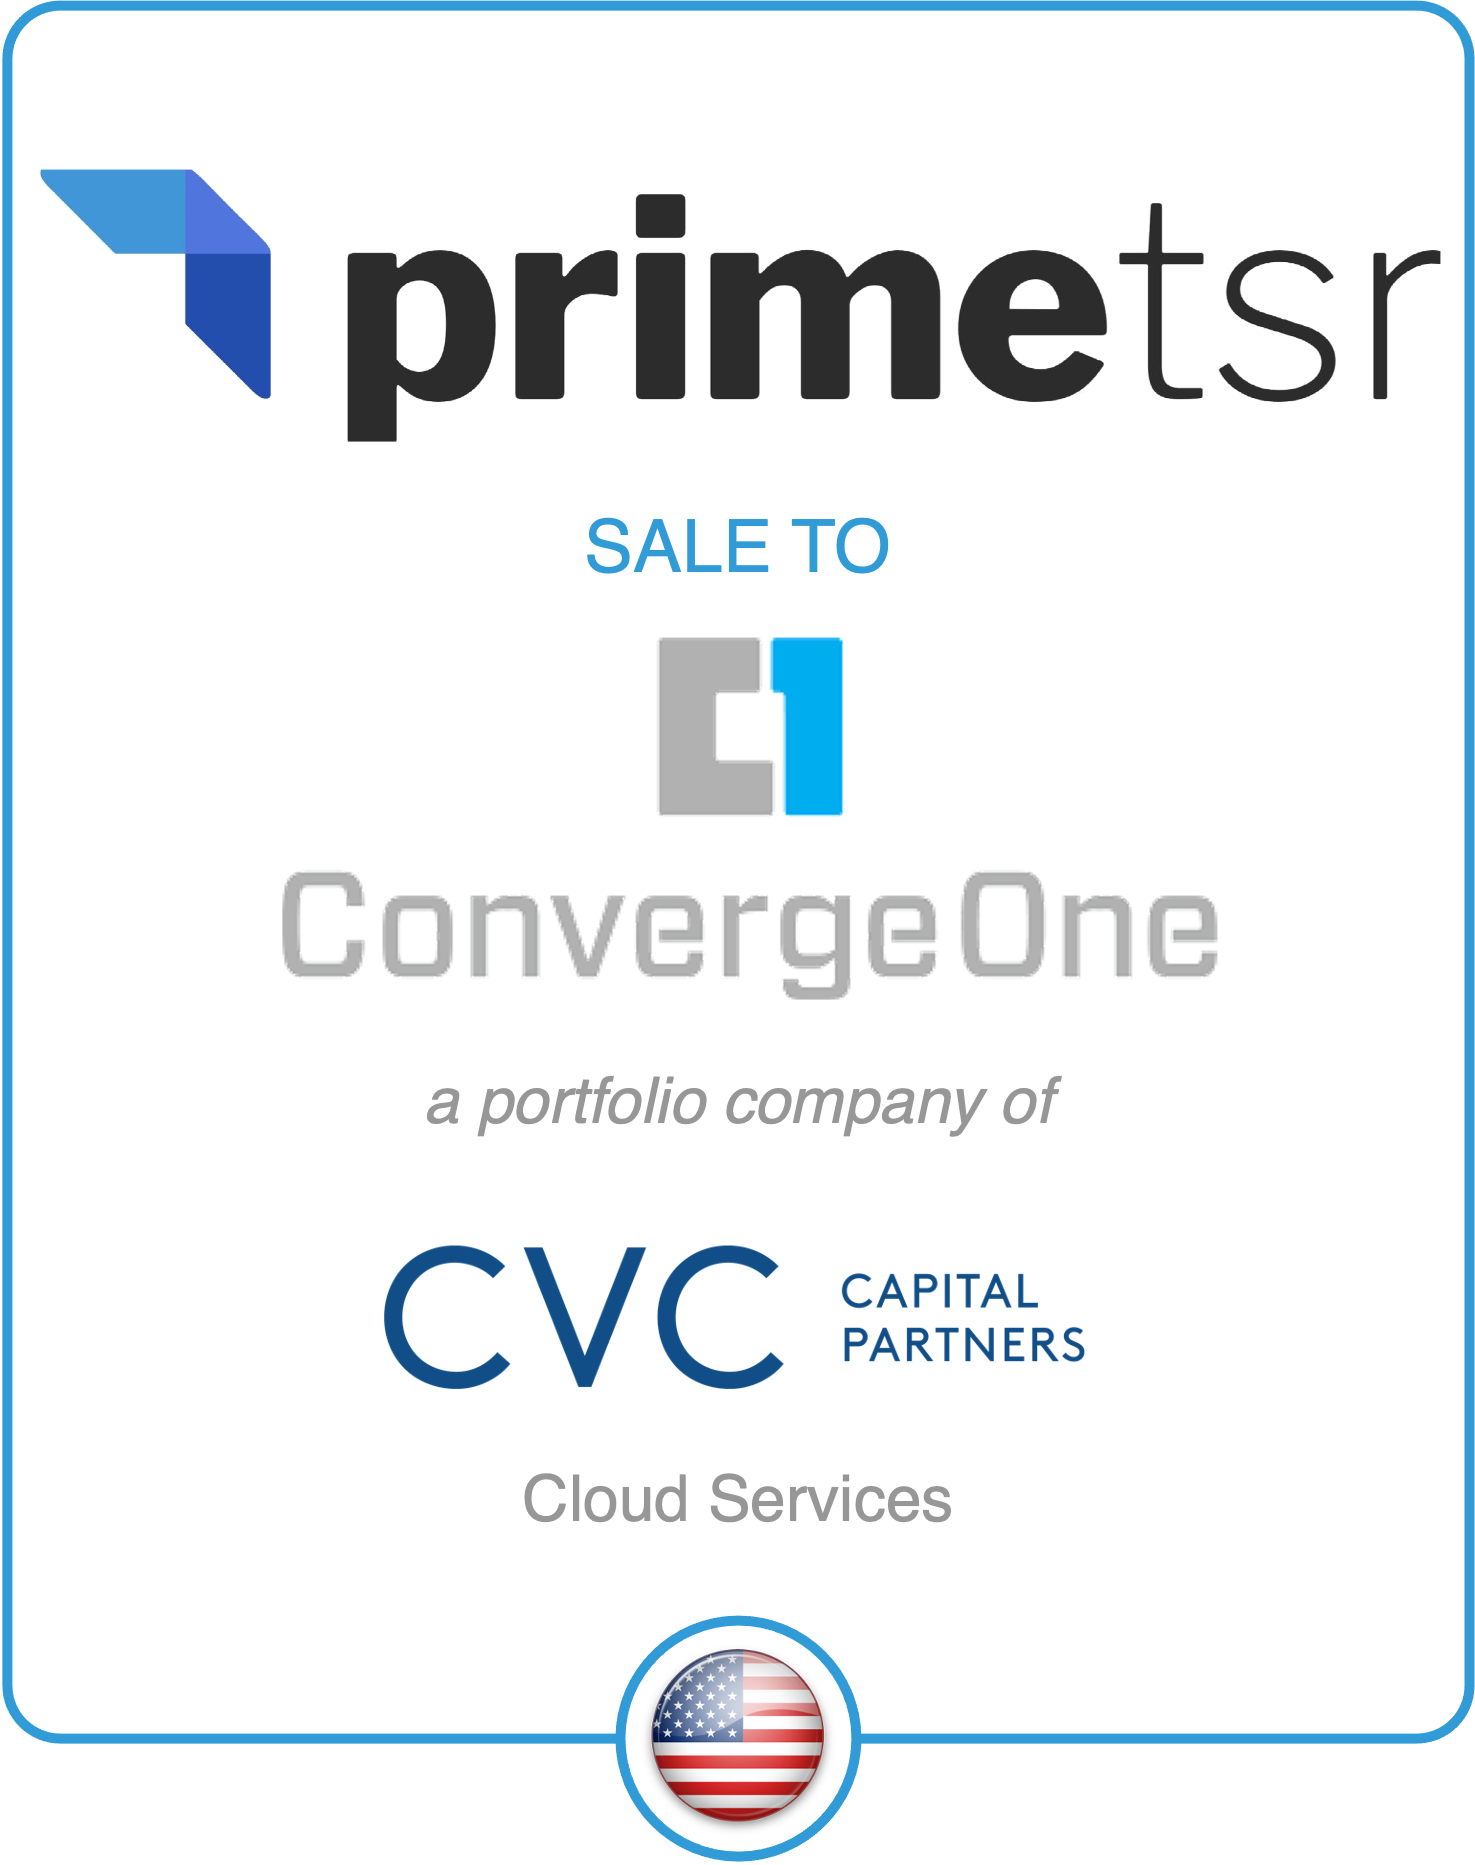 Drake Star Acts as Exclusive Advisor to Prime TSR on its Sale to ConvergeOne